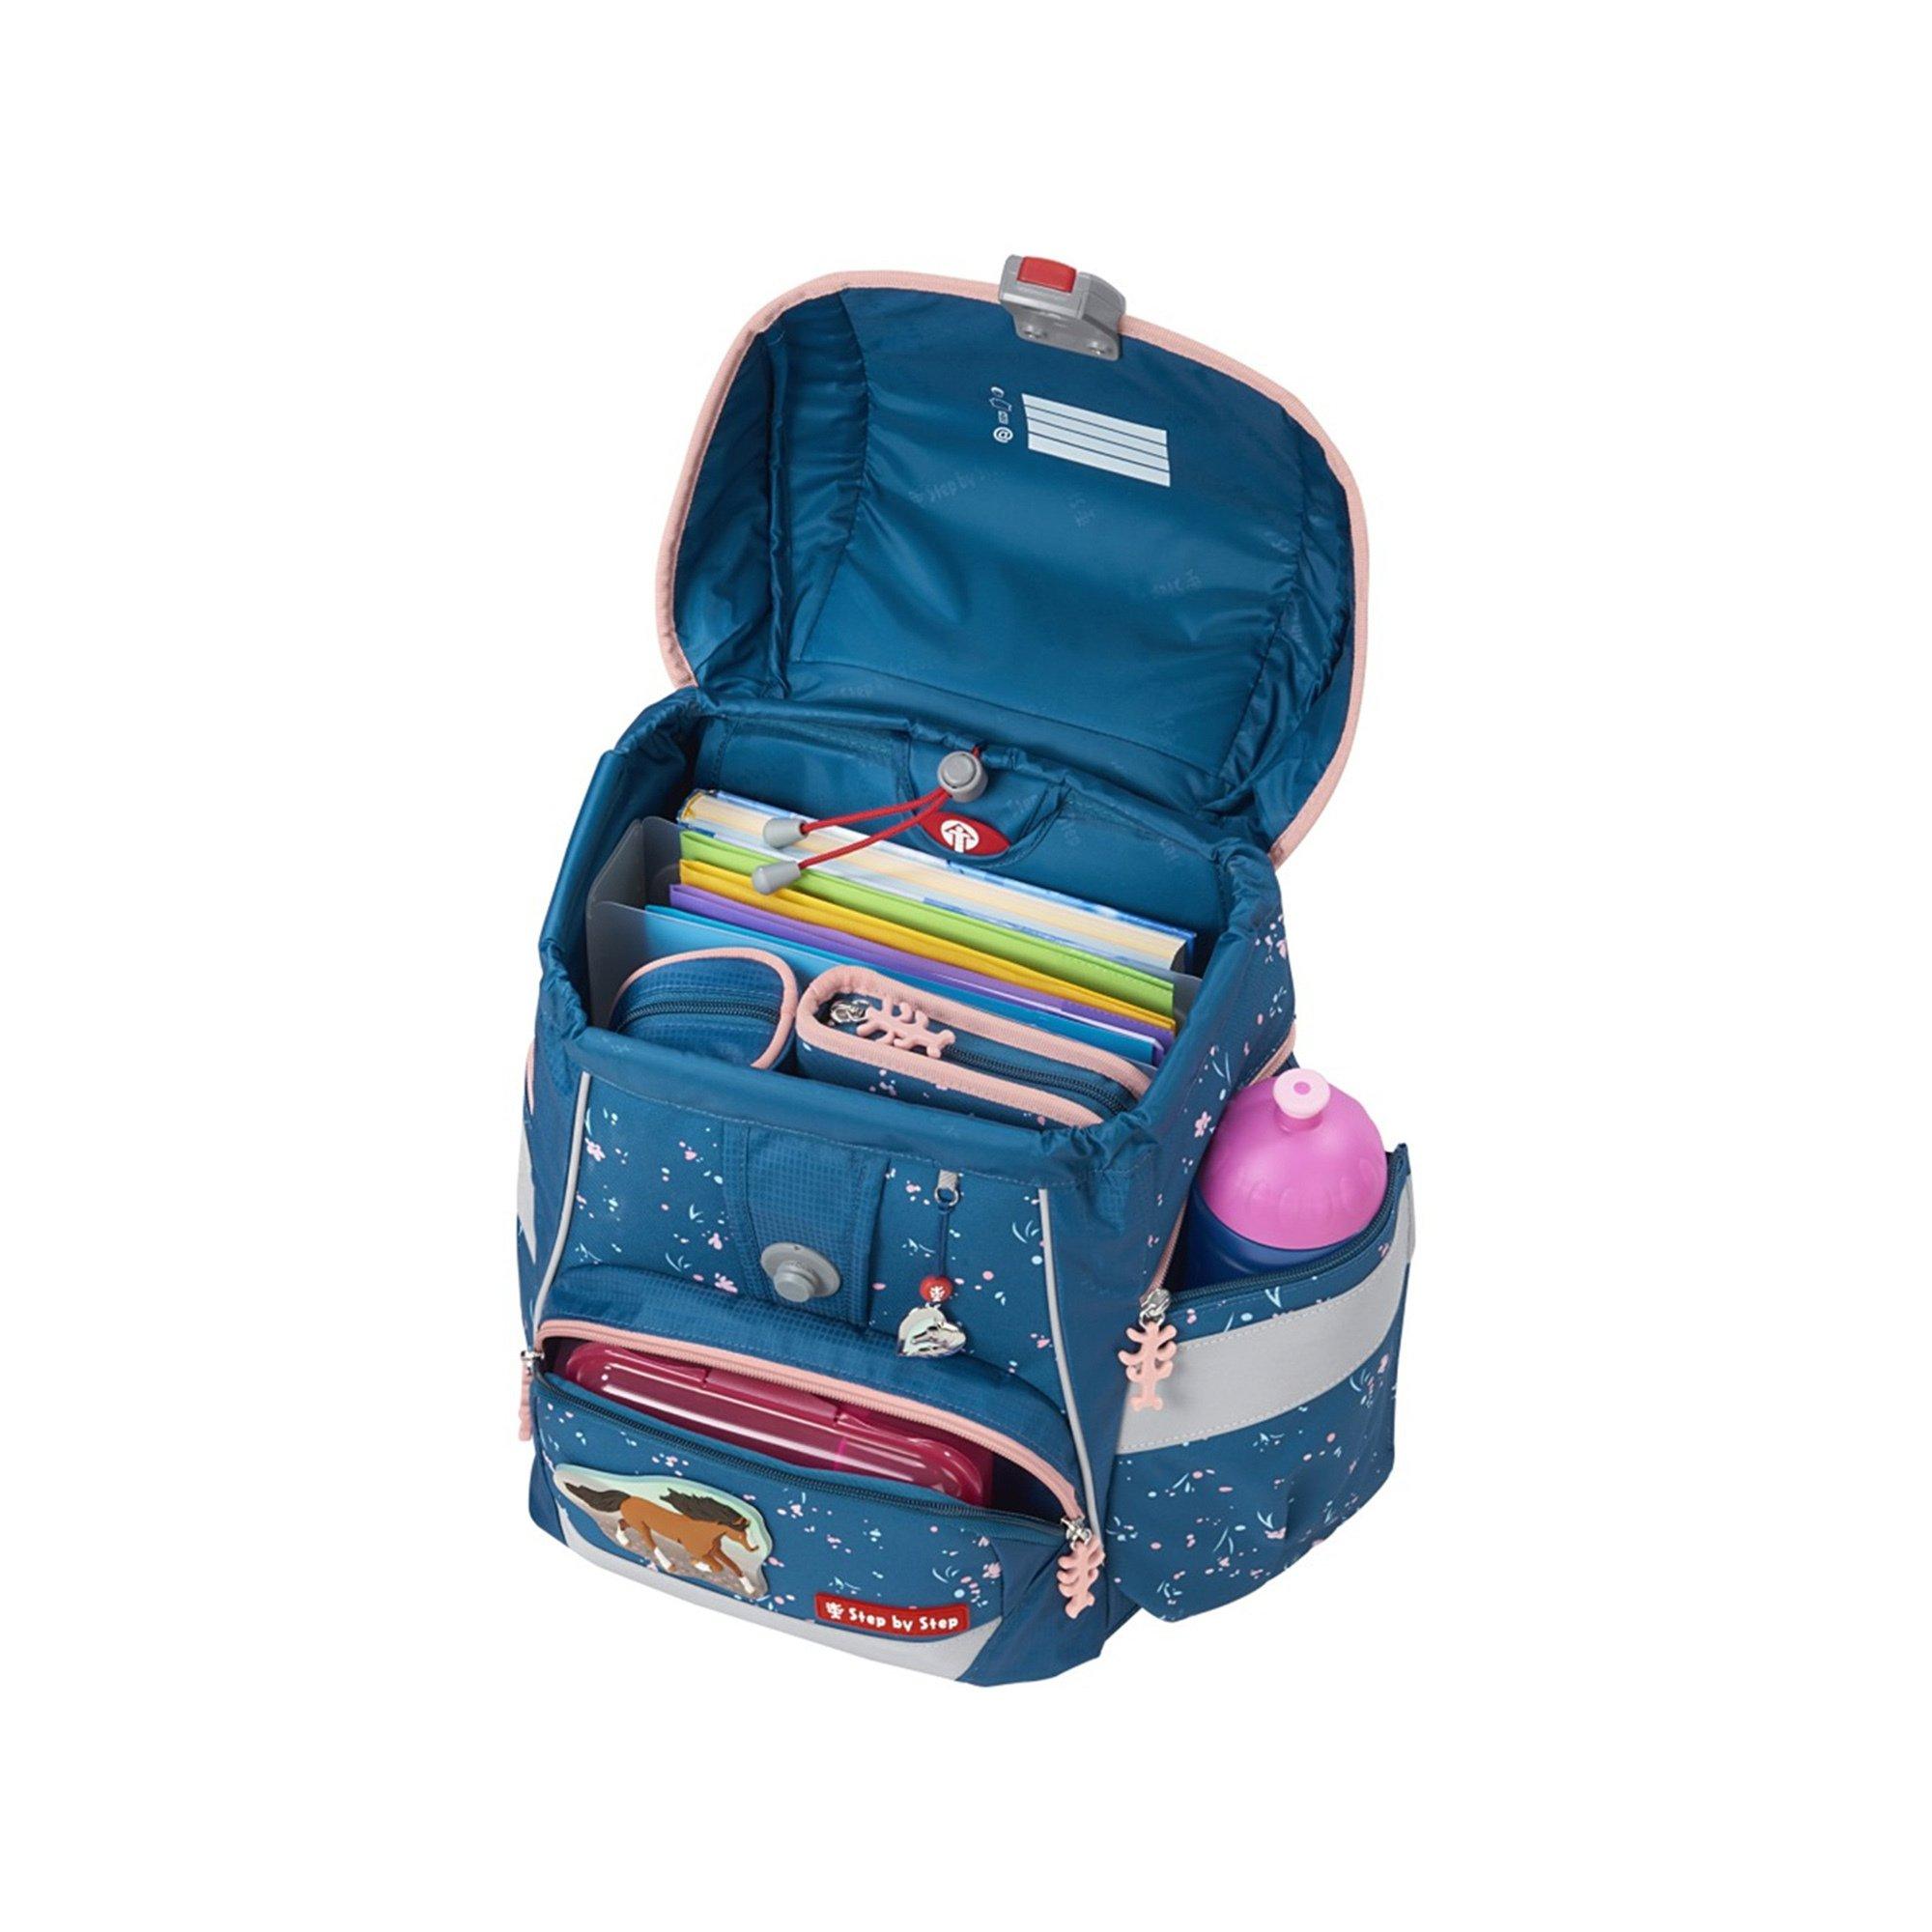 Step by Step Cartable scolaire, 6 pièces Wild Horse Ronja 